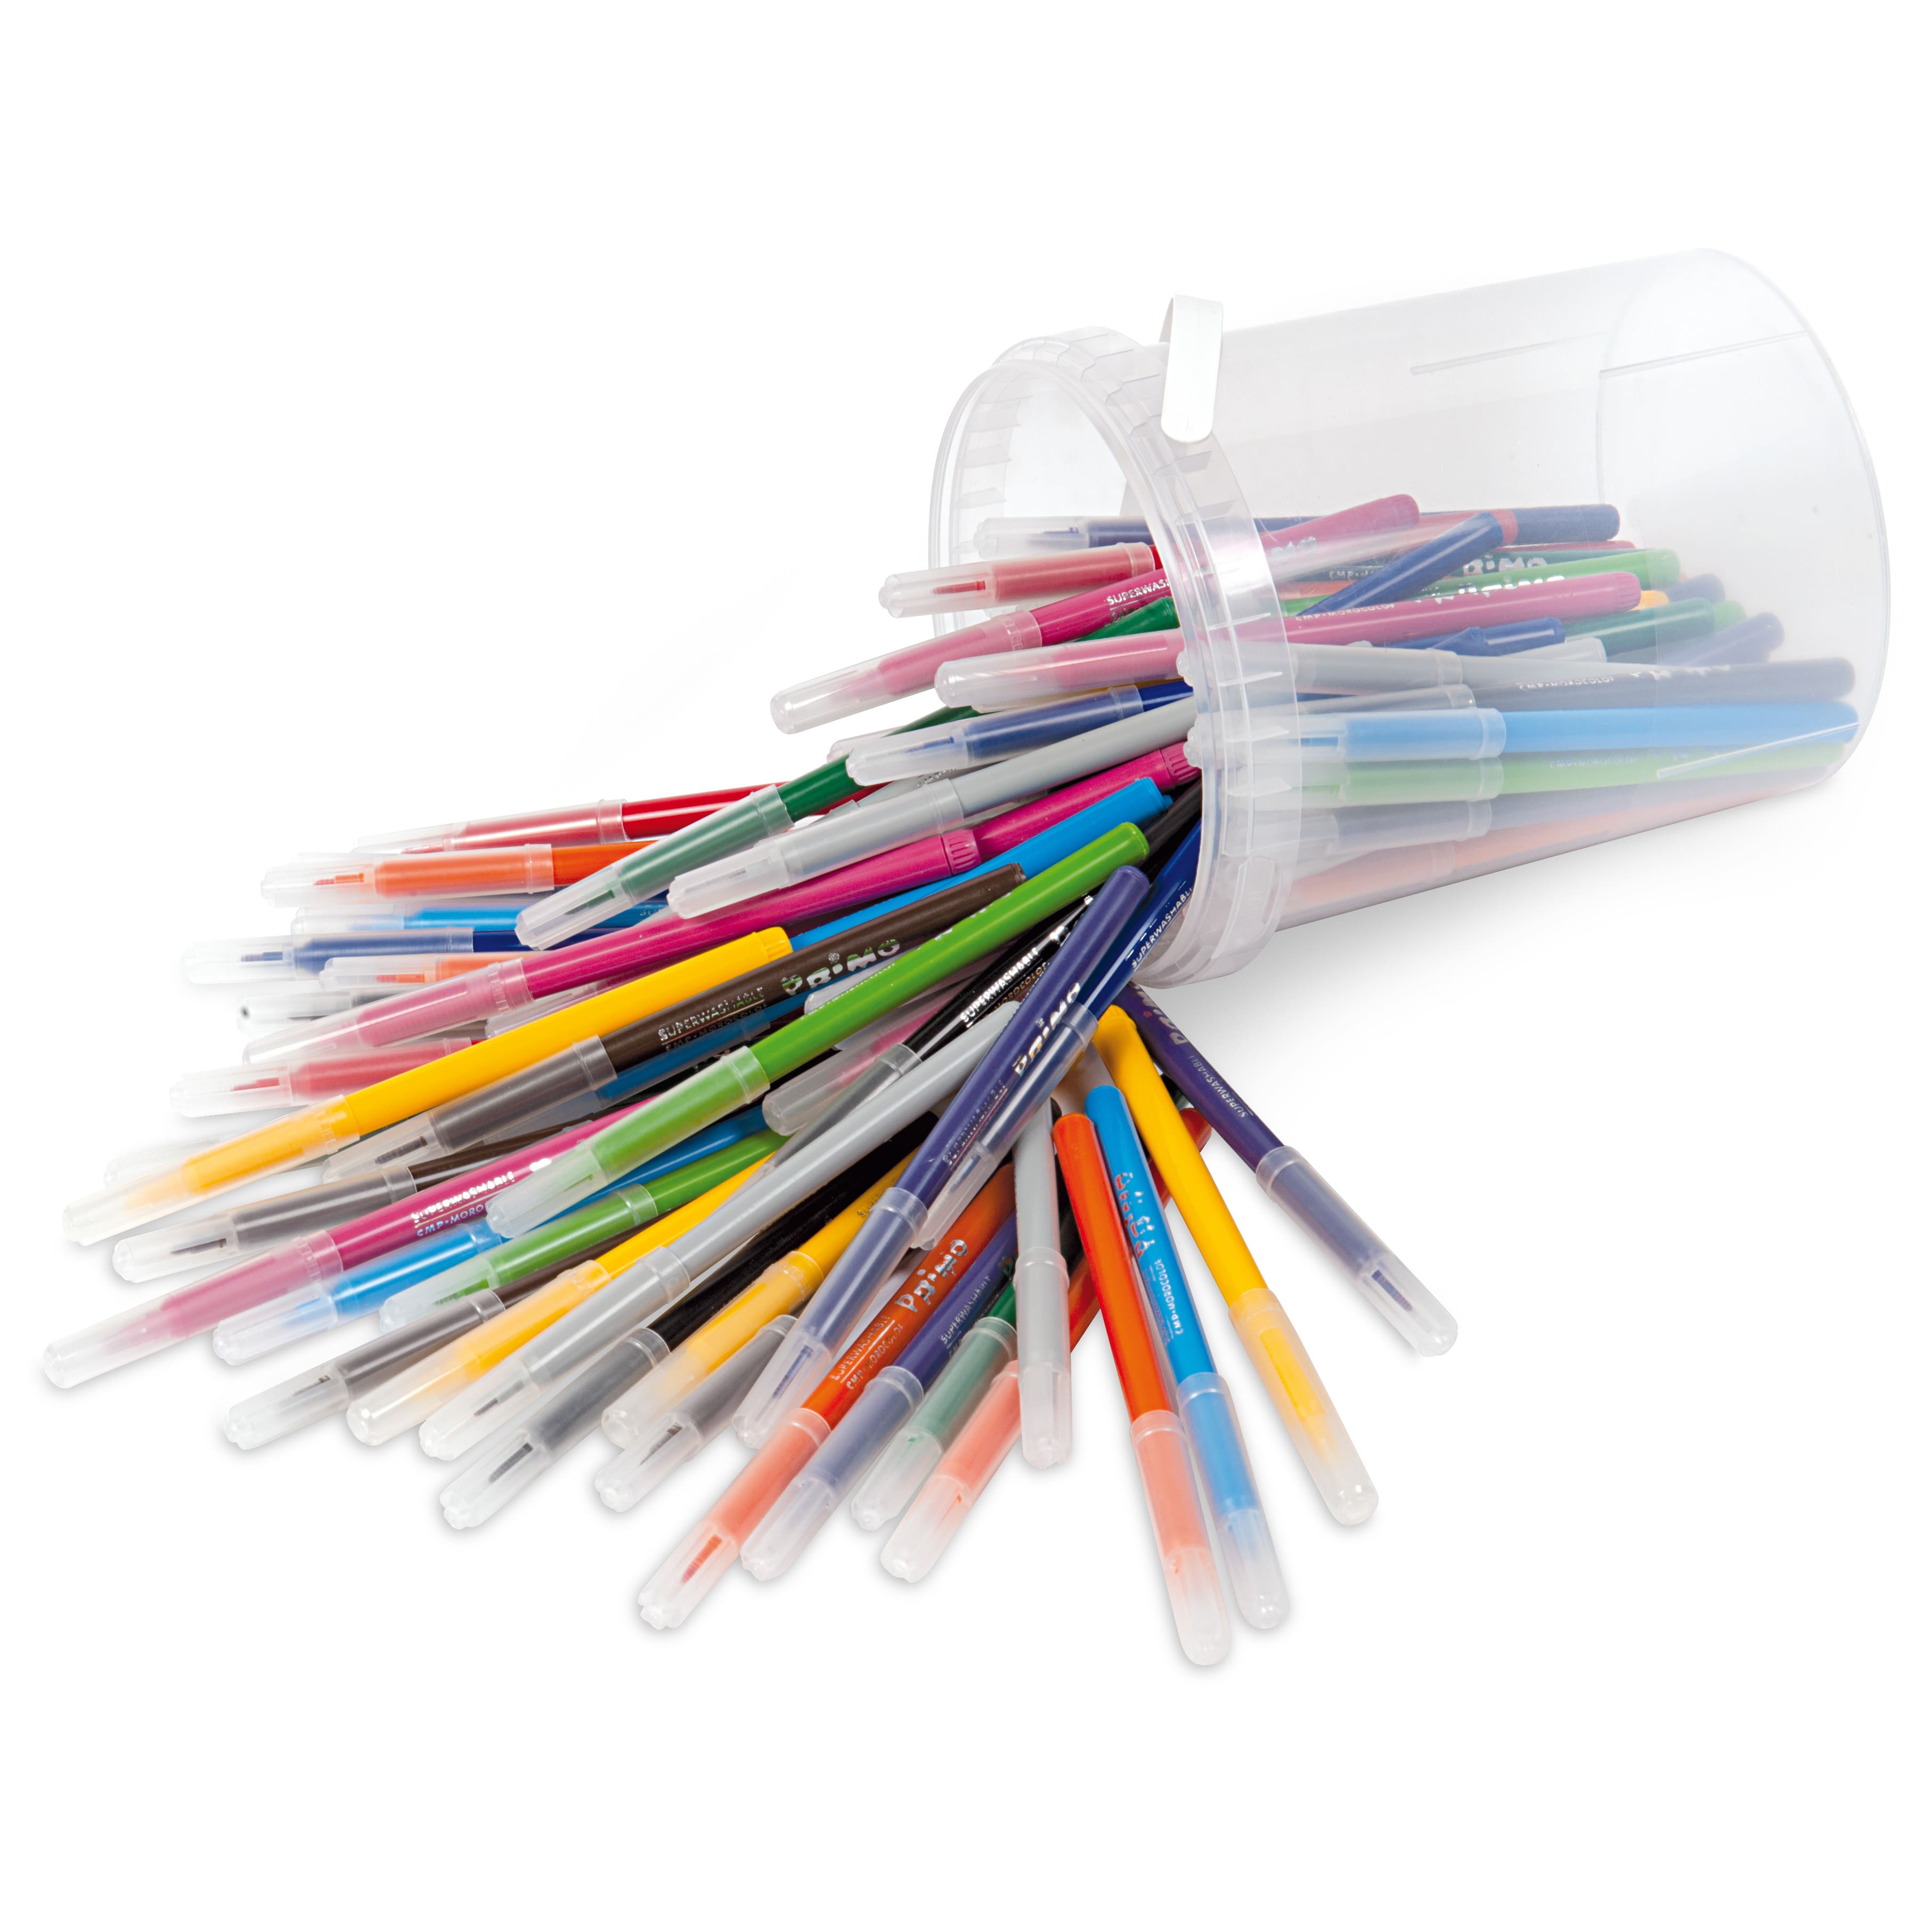 PRiMO 96 Piece Fine Tip Bucket of Markers